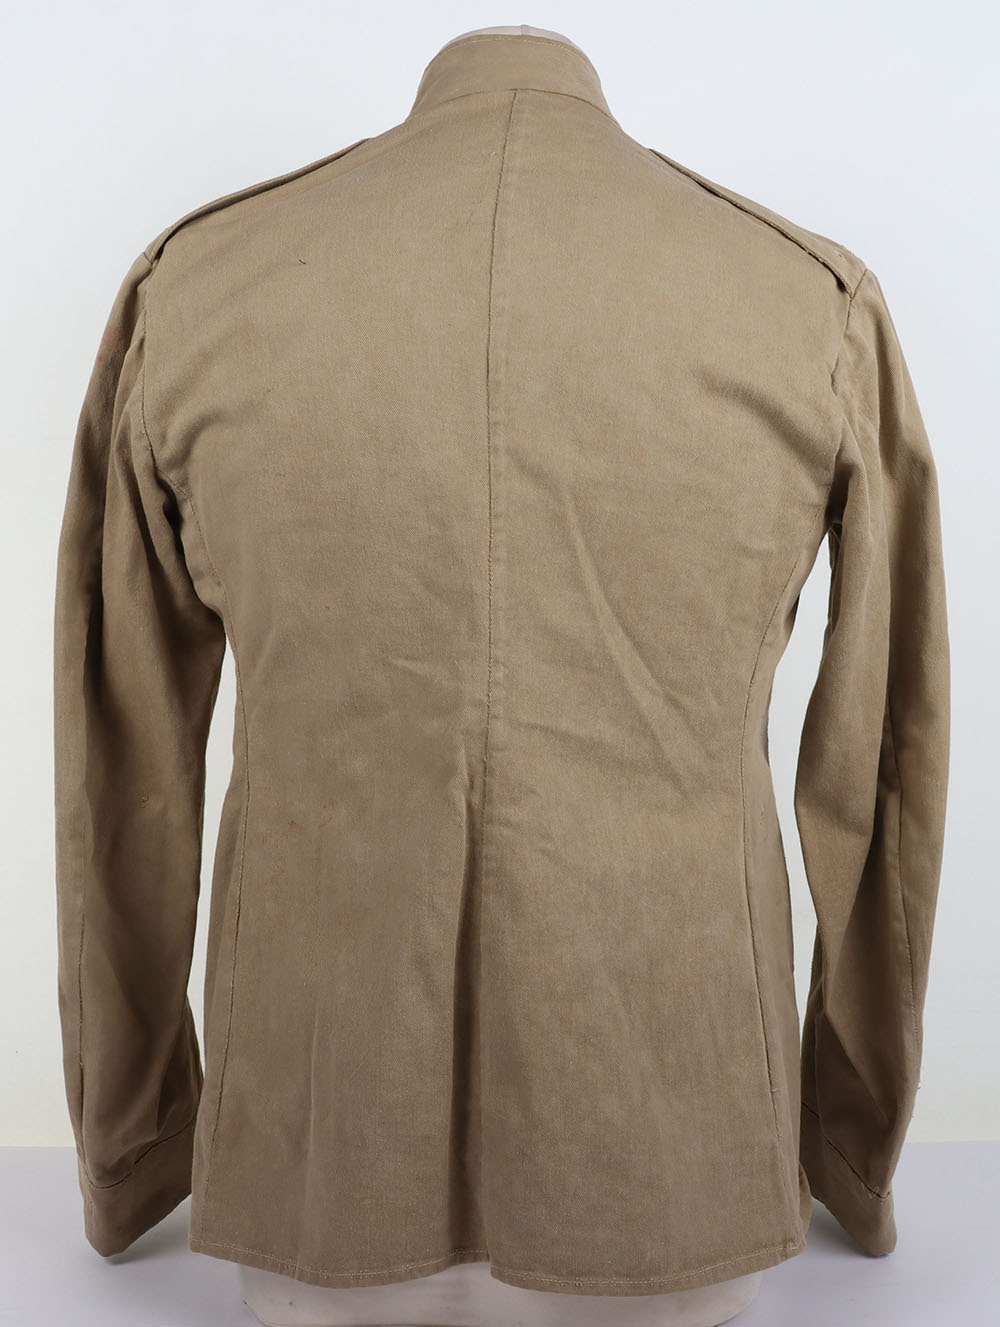 WW2 British Army Officers Tropical Tunic - Image 3 of 7